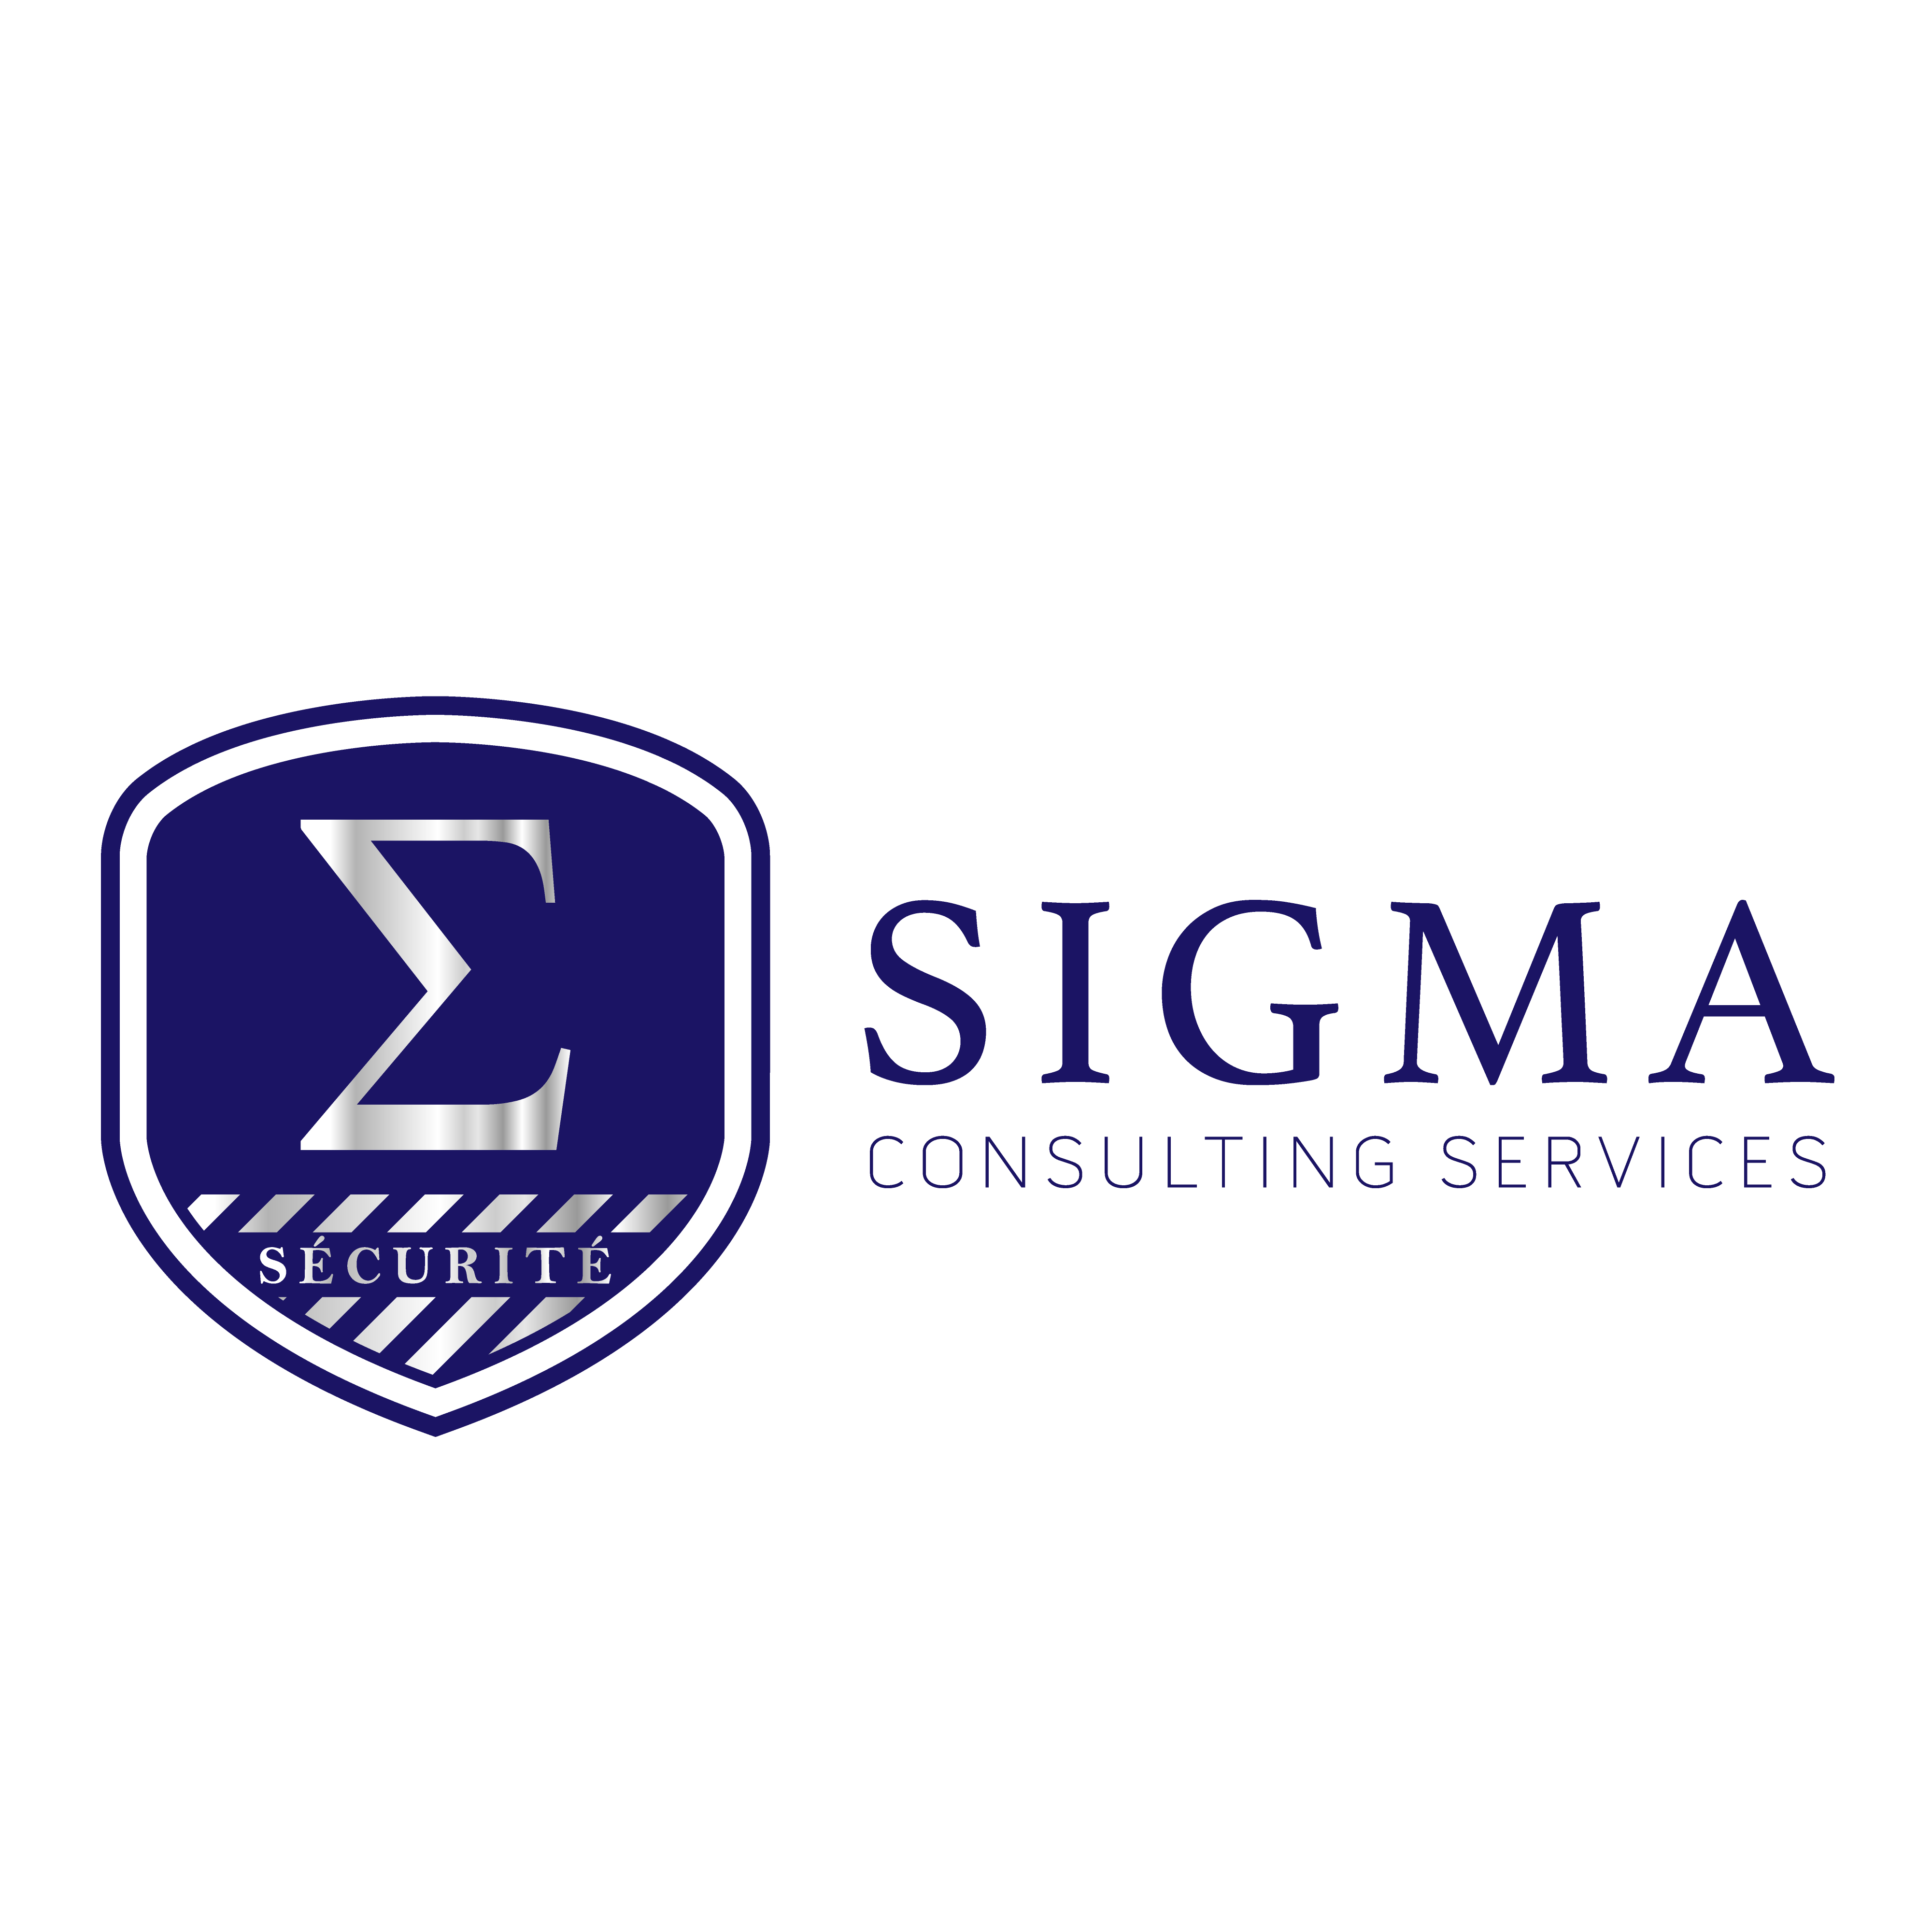 Sigma Consulting Services